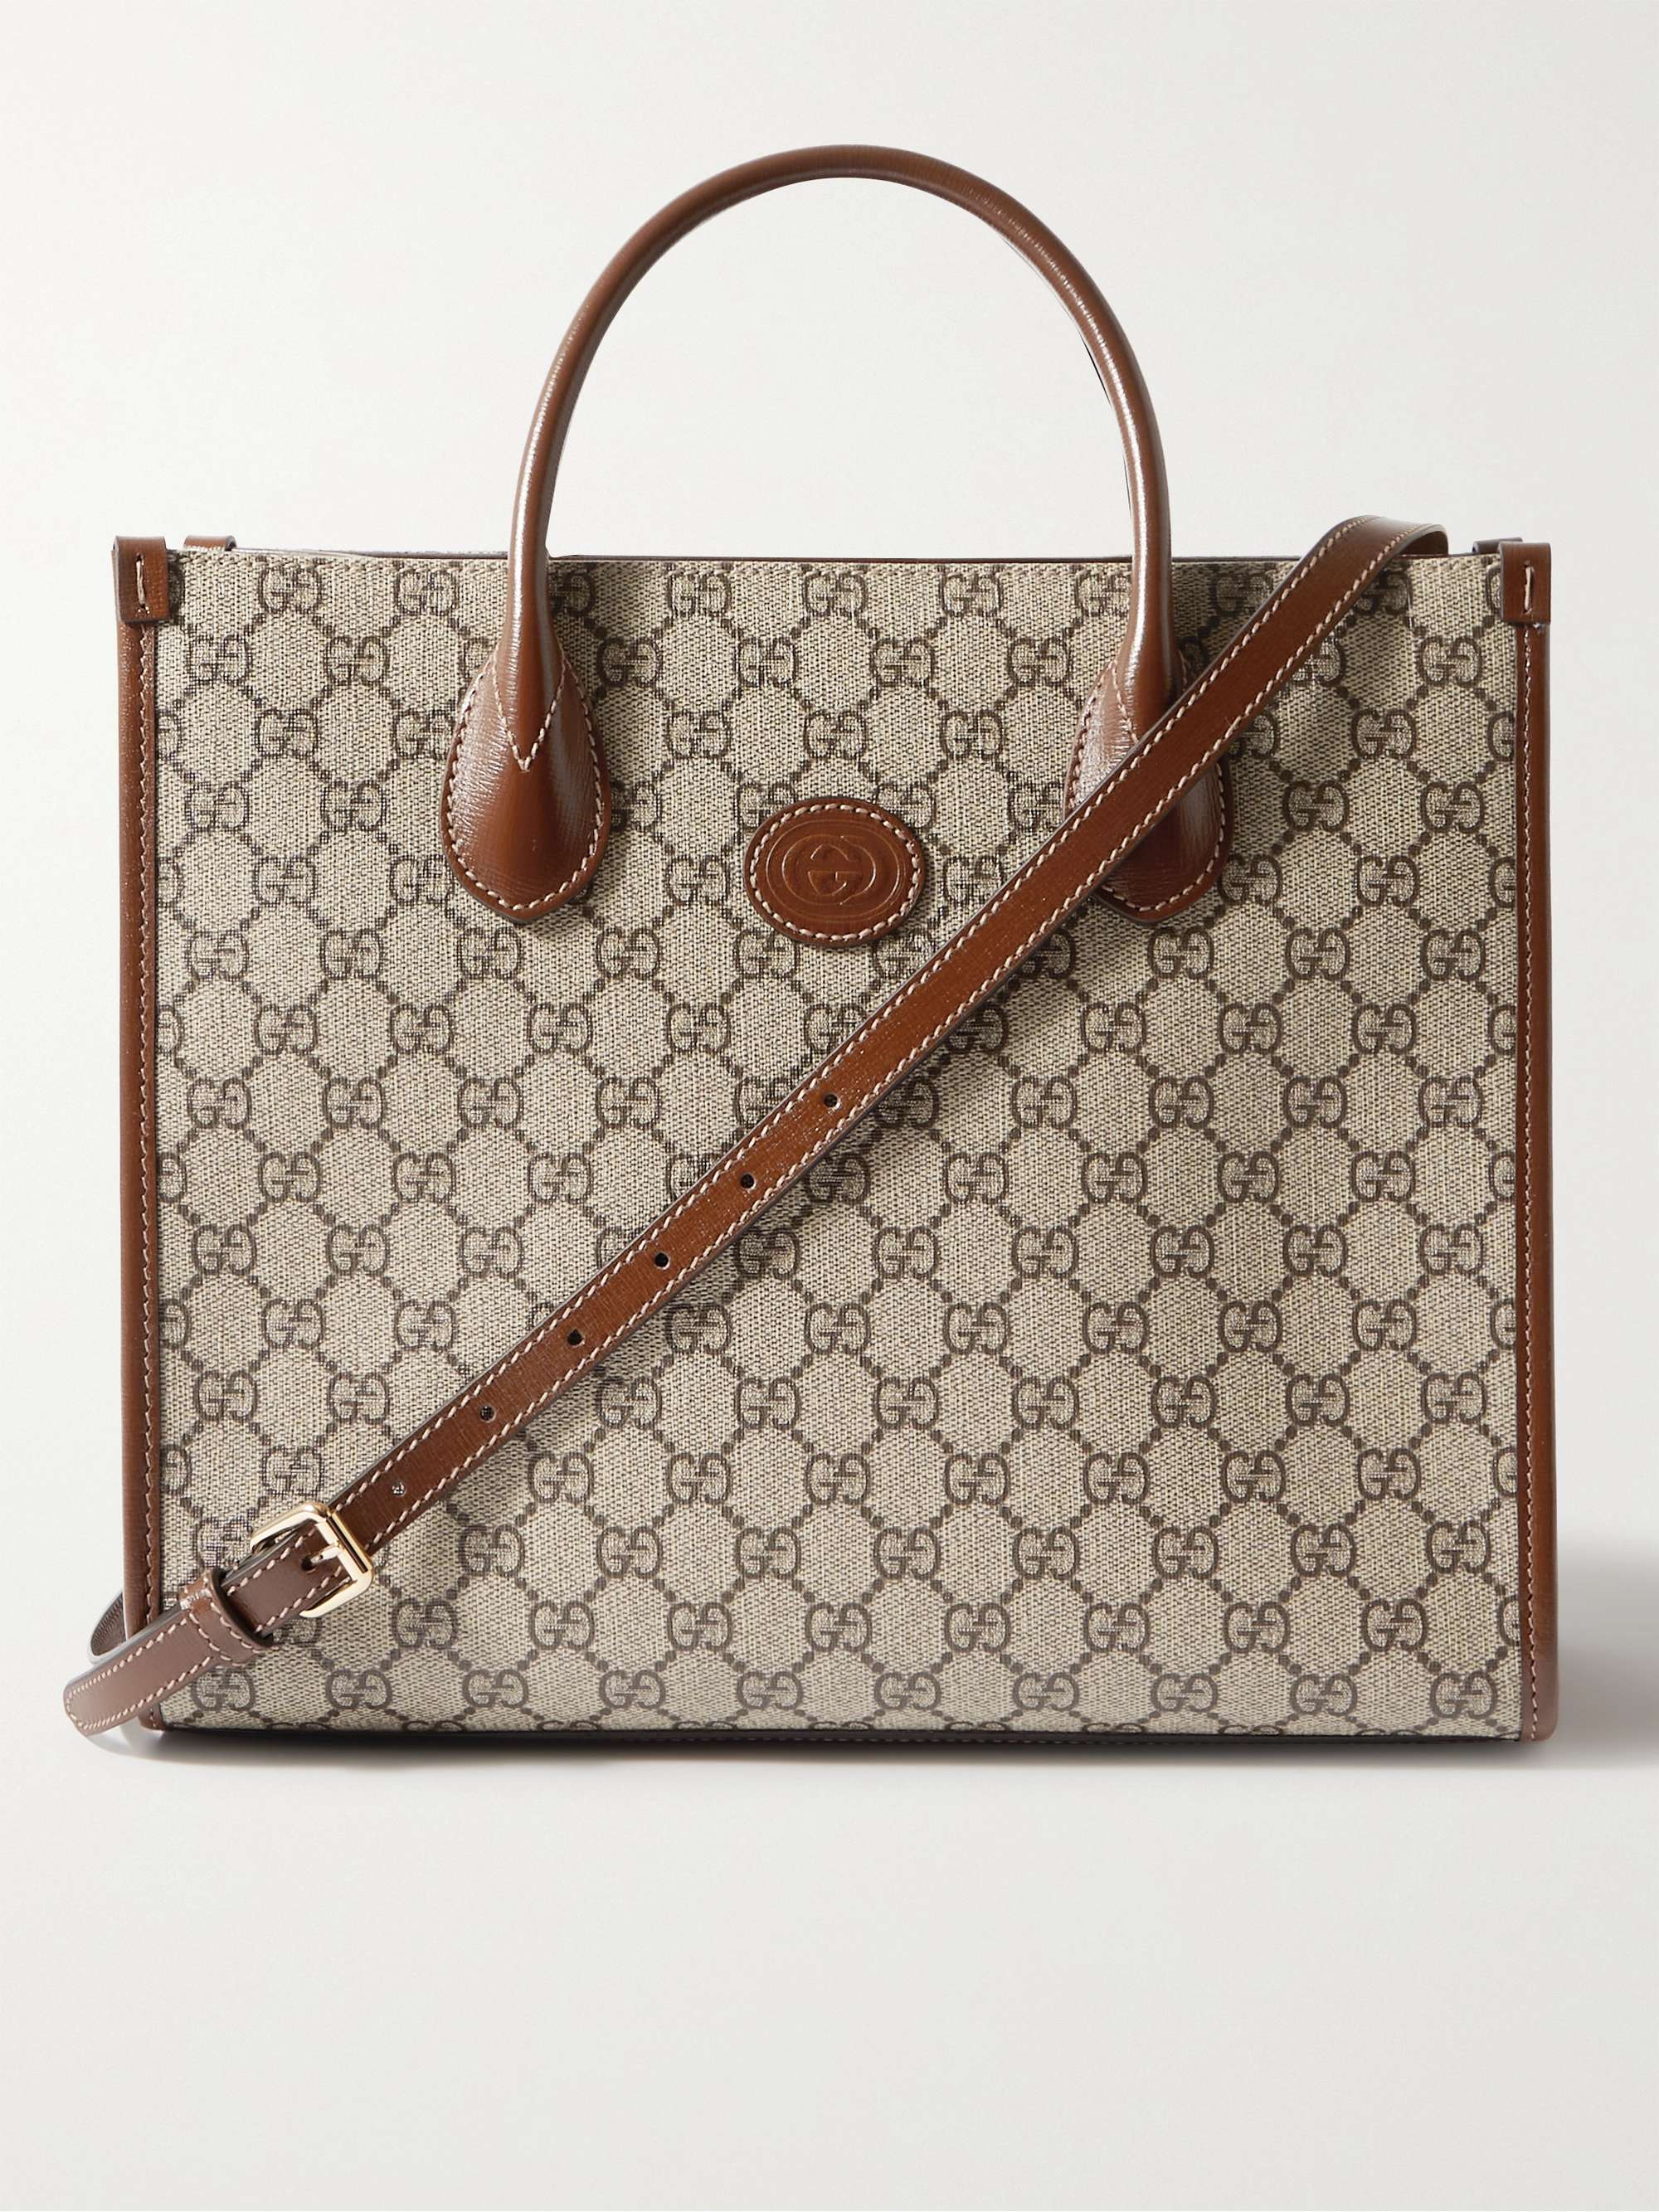 GUCCI Ophidia Leather-Trimmed Monogrammed Coated-Canvas Tote Bag | MR PORTER